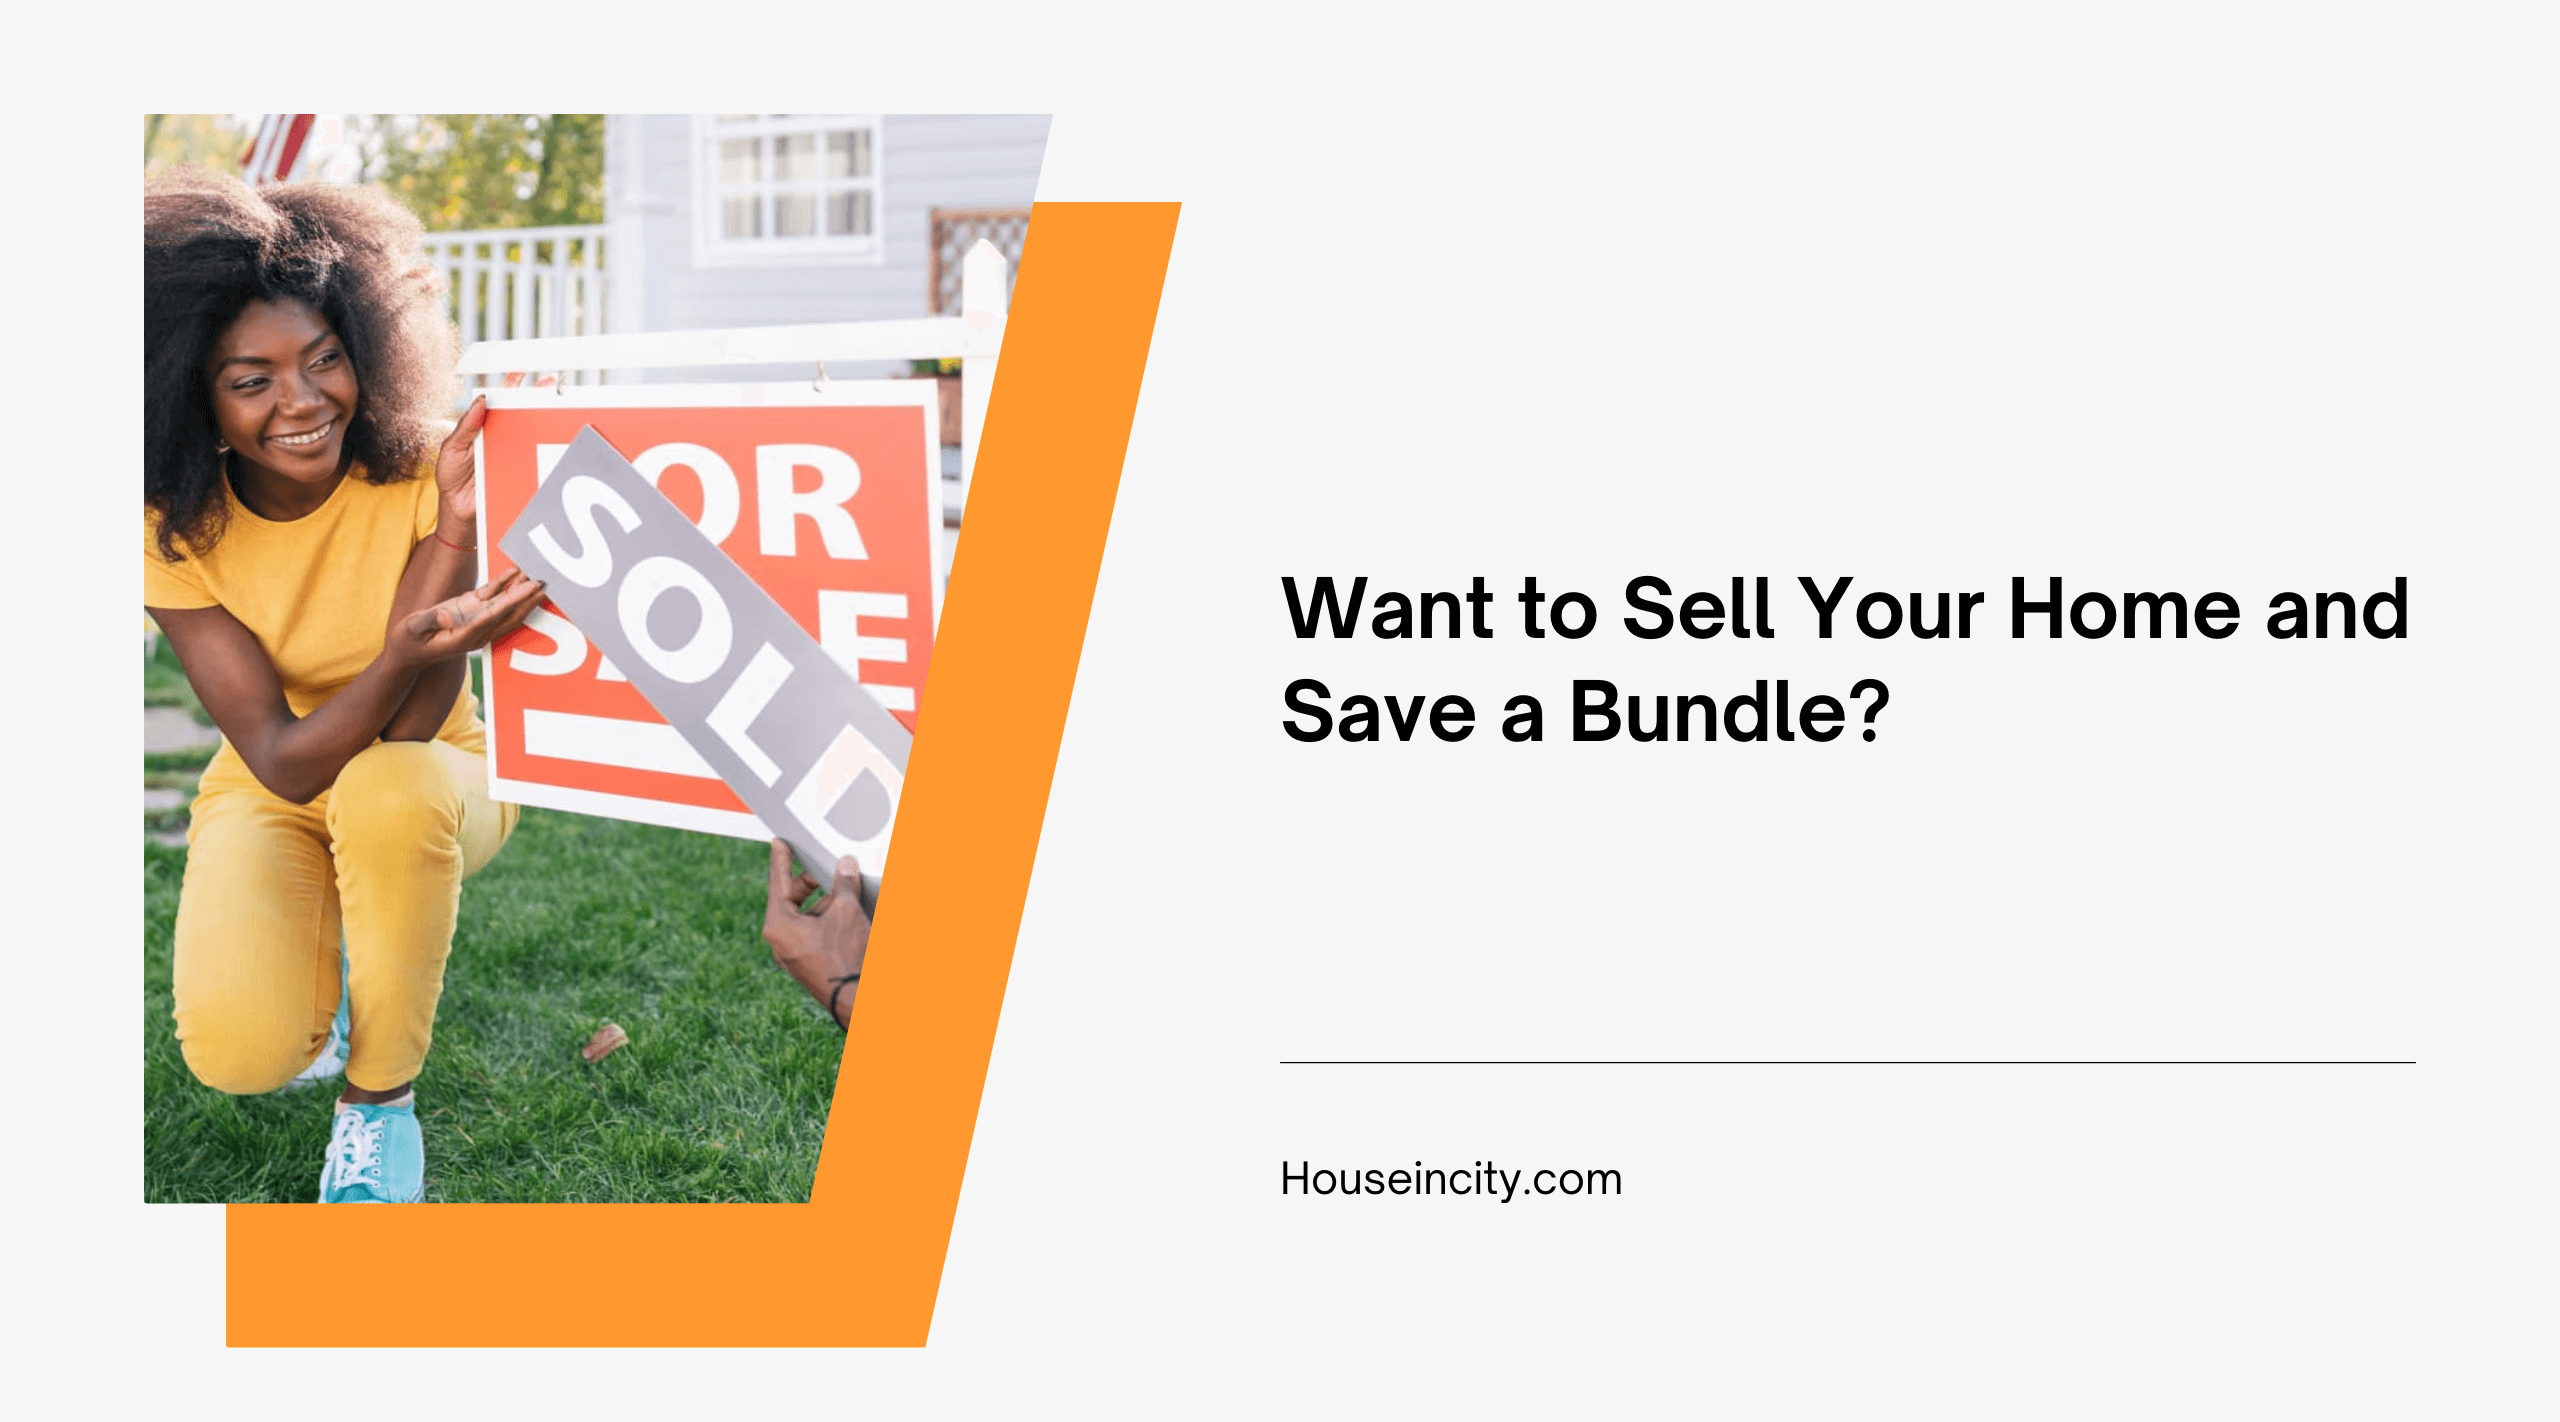 Want to Sell Your Home and Save a Bundle?